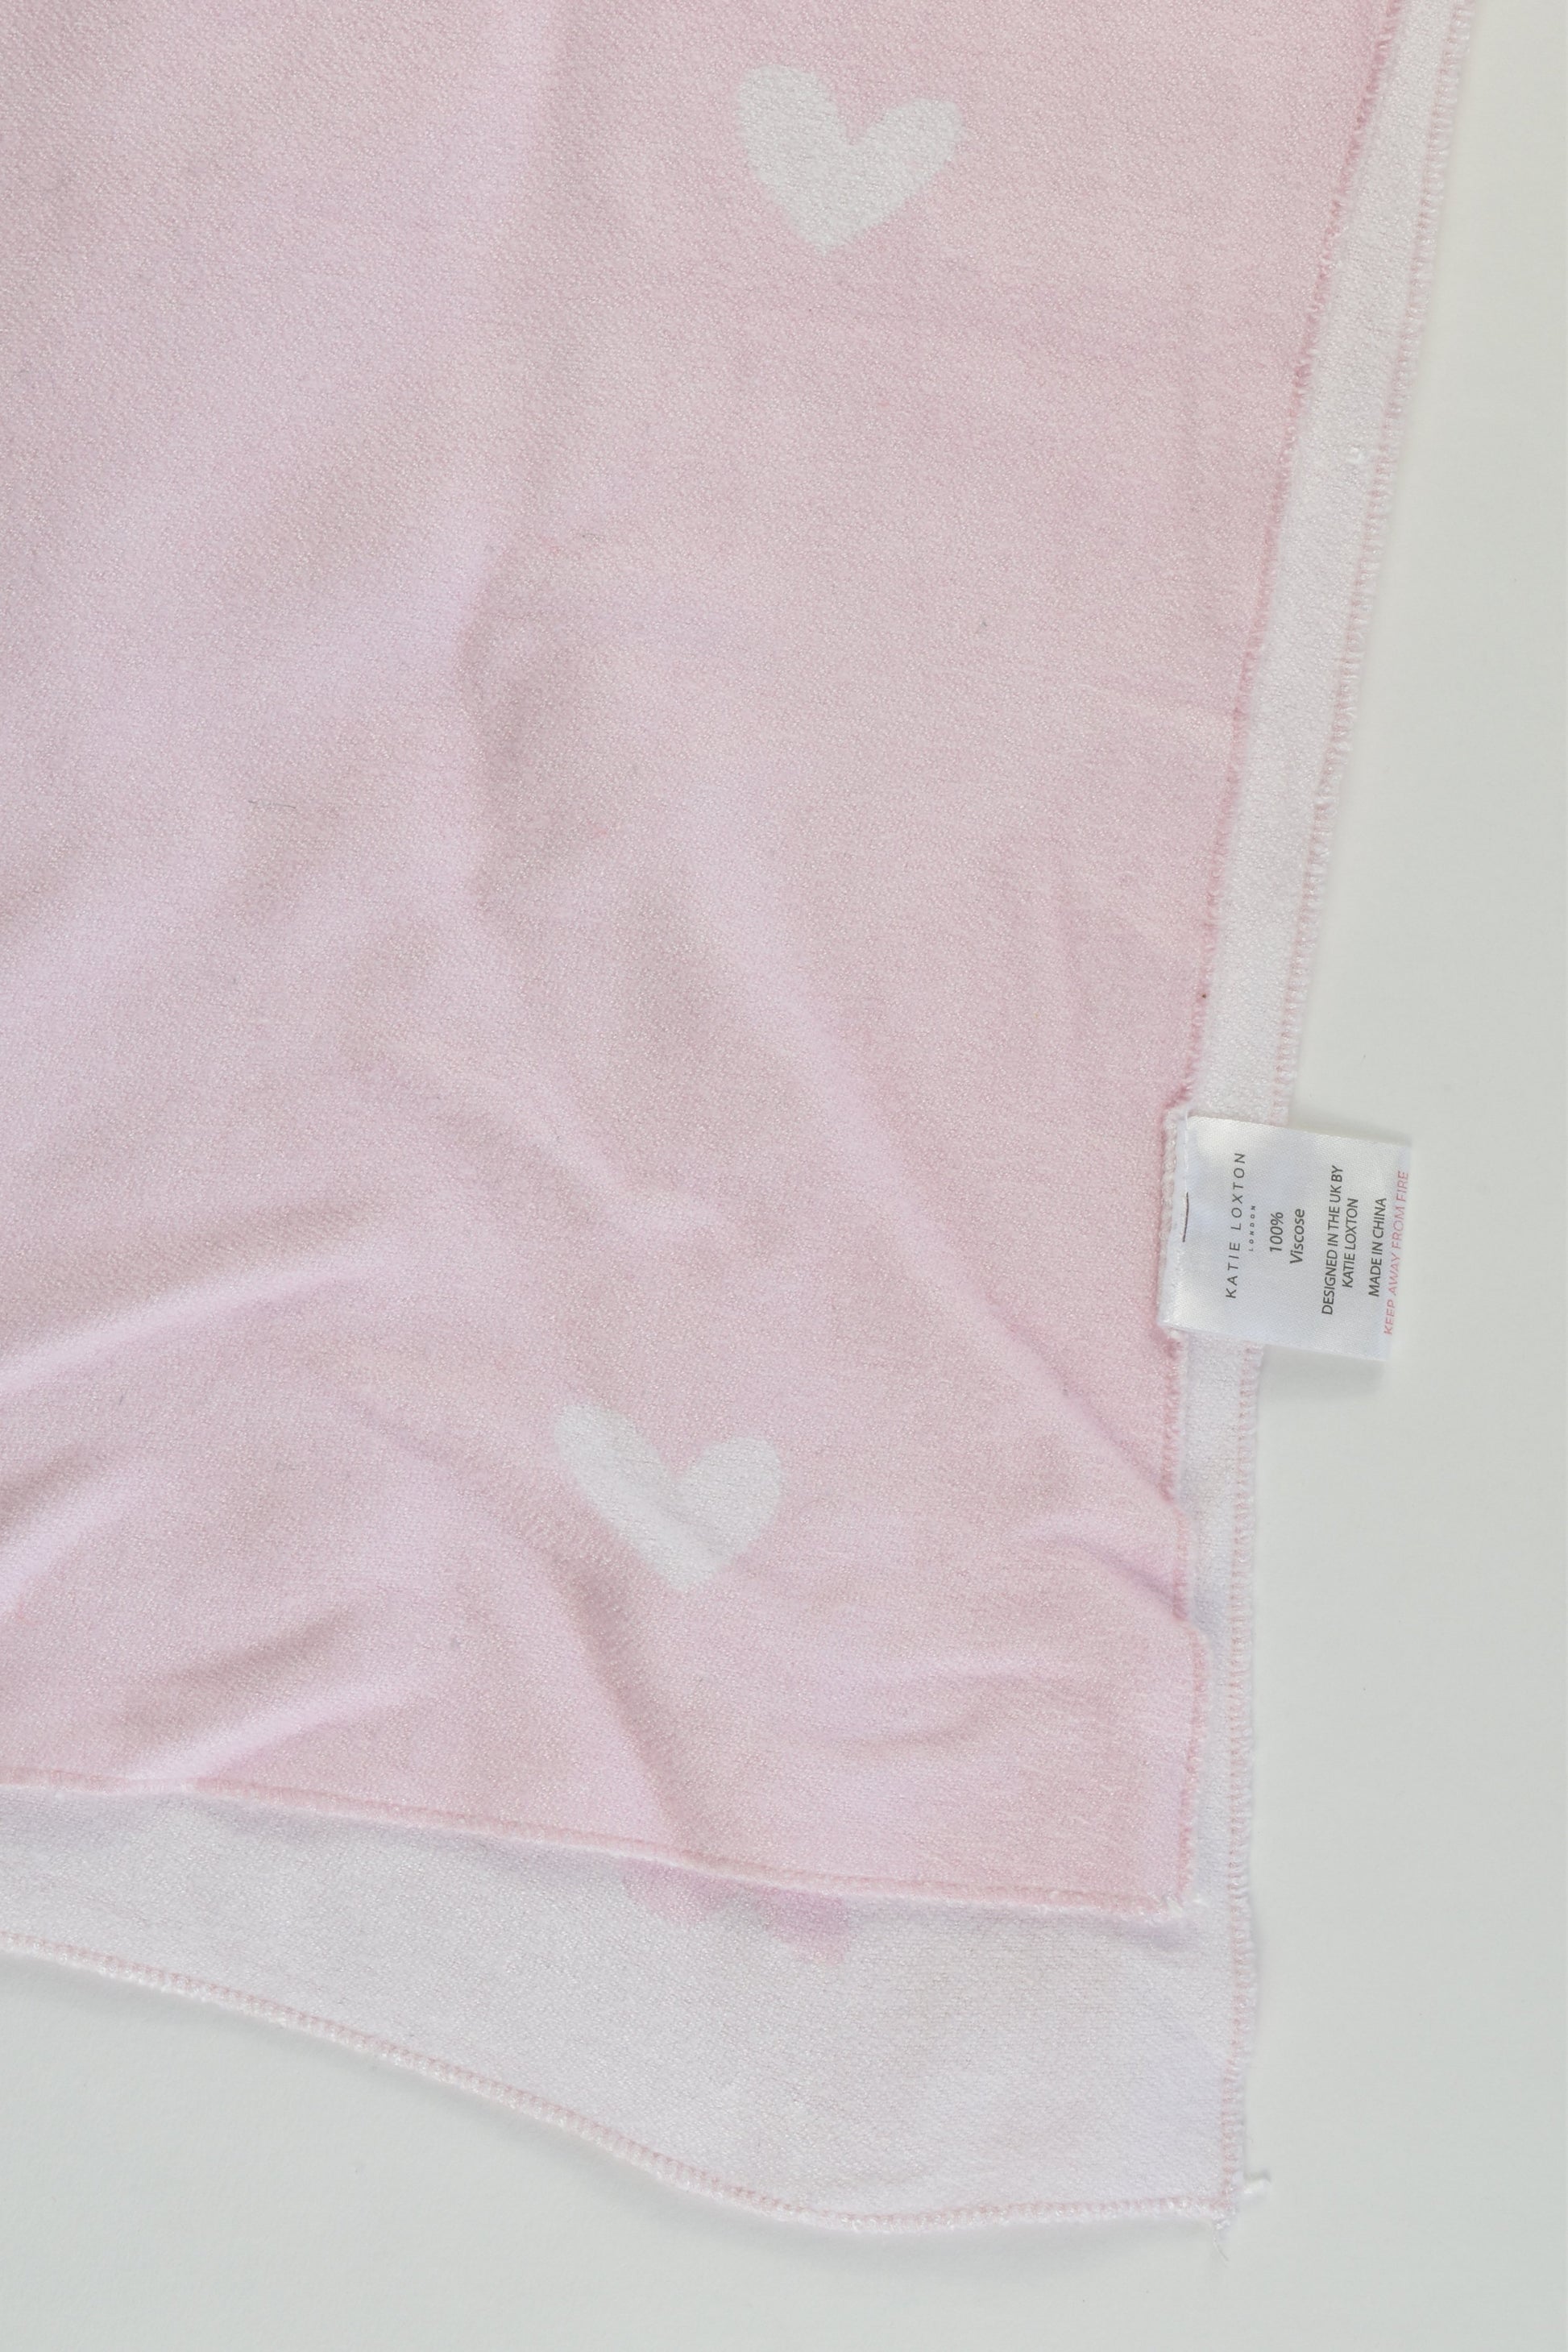 Katie Loxton 'Wrapped Up In Love' Baby Blanket